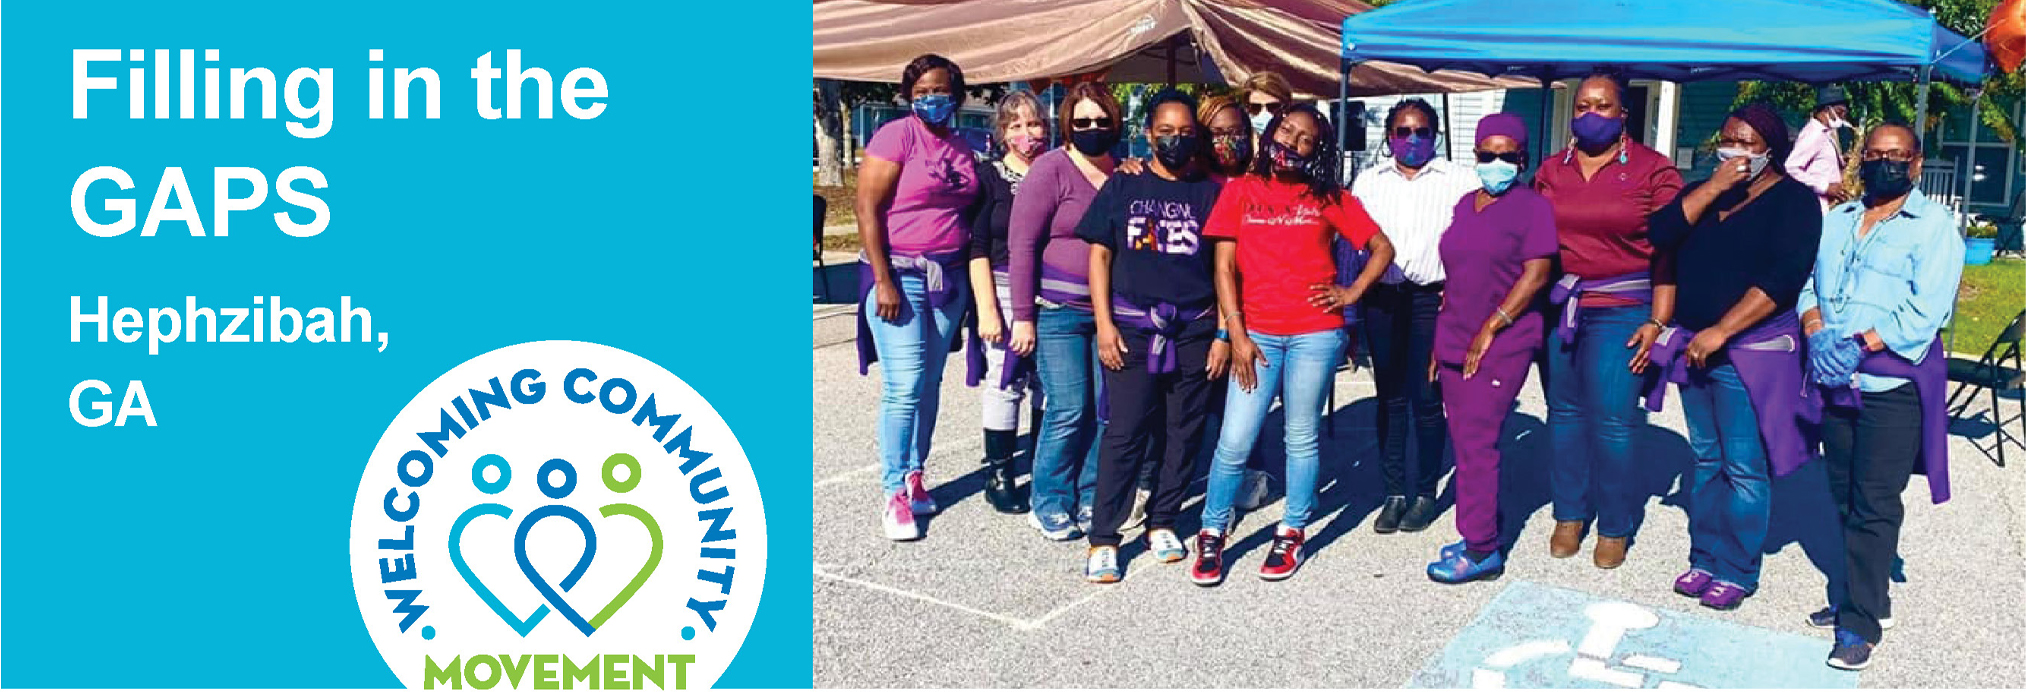 Filling in the Gaps header with Black women in a line behind and accessible logo for parking